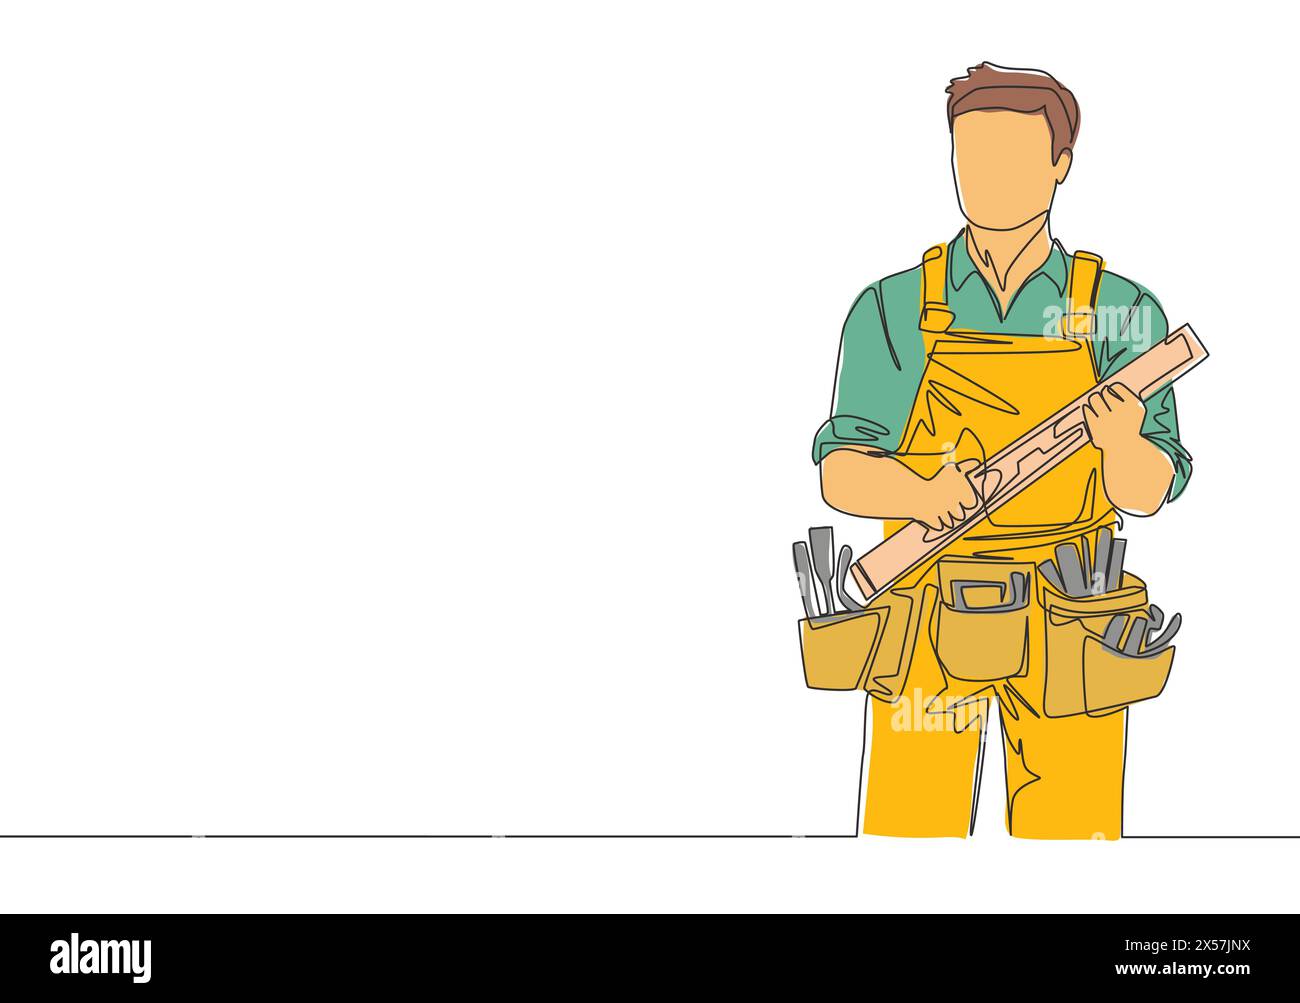 Single continuous line drawing of young handyman wearing building construction uniform while holding spirit level. Craftsman home repair service conce Stock Vector